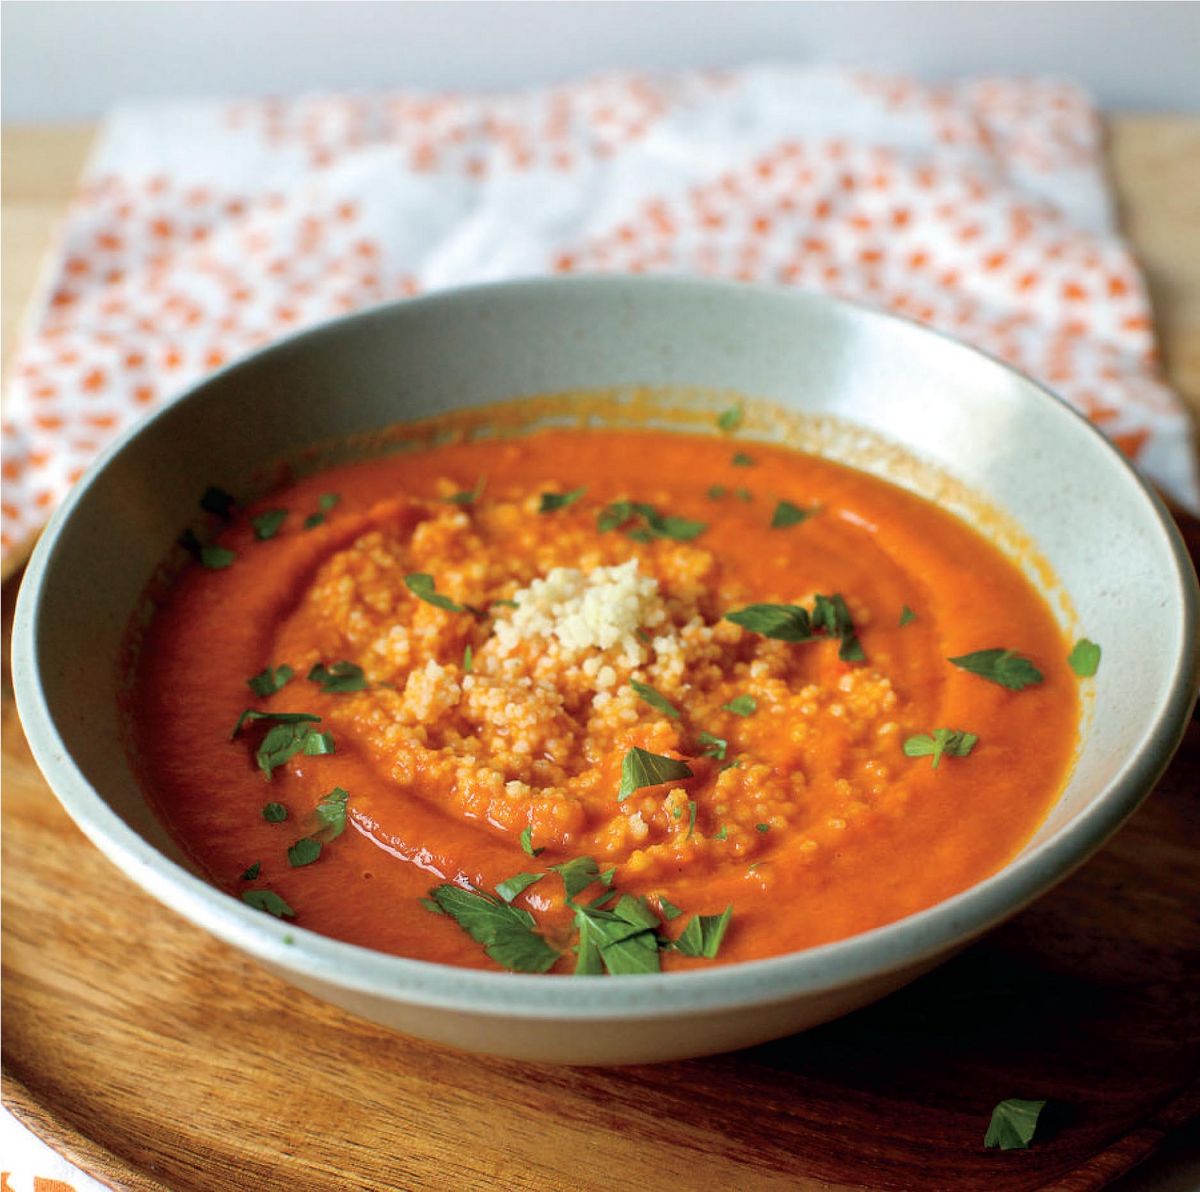 Spiced Carrot and Pepper Soup with a Couscous Swirl